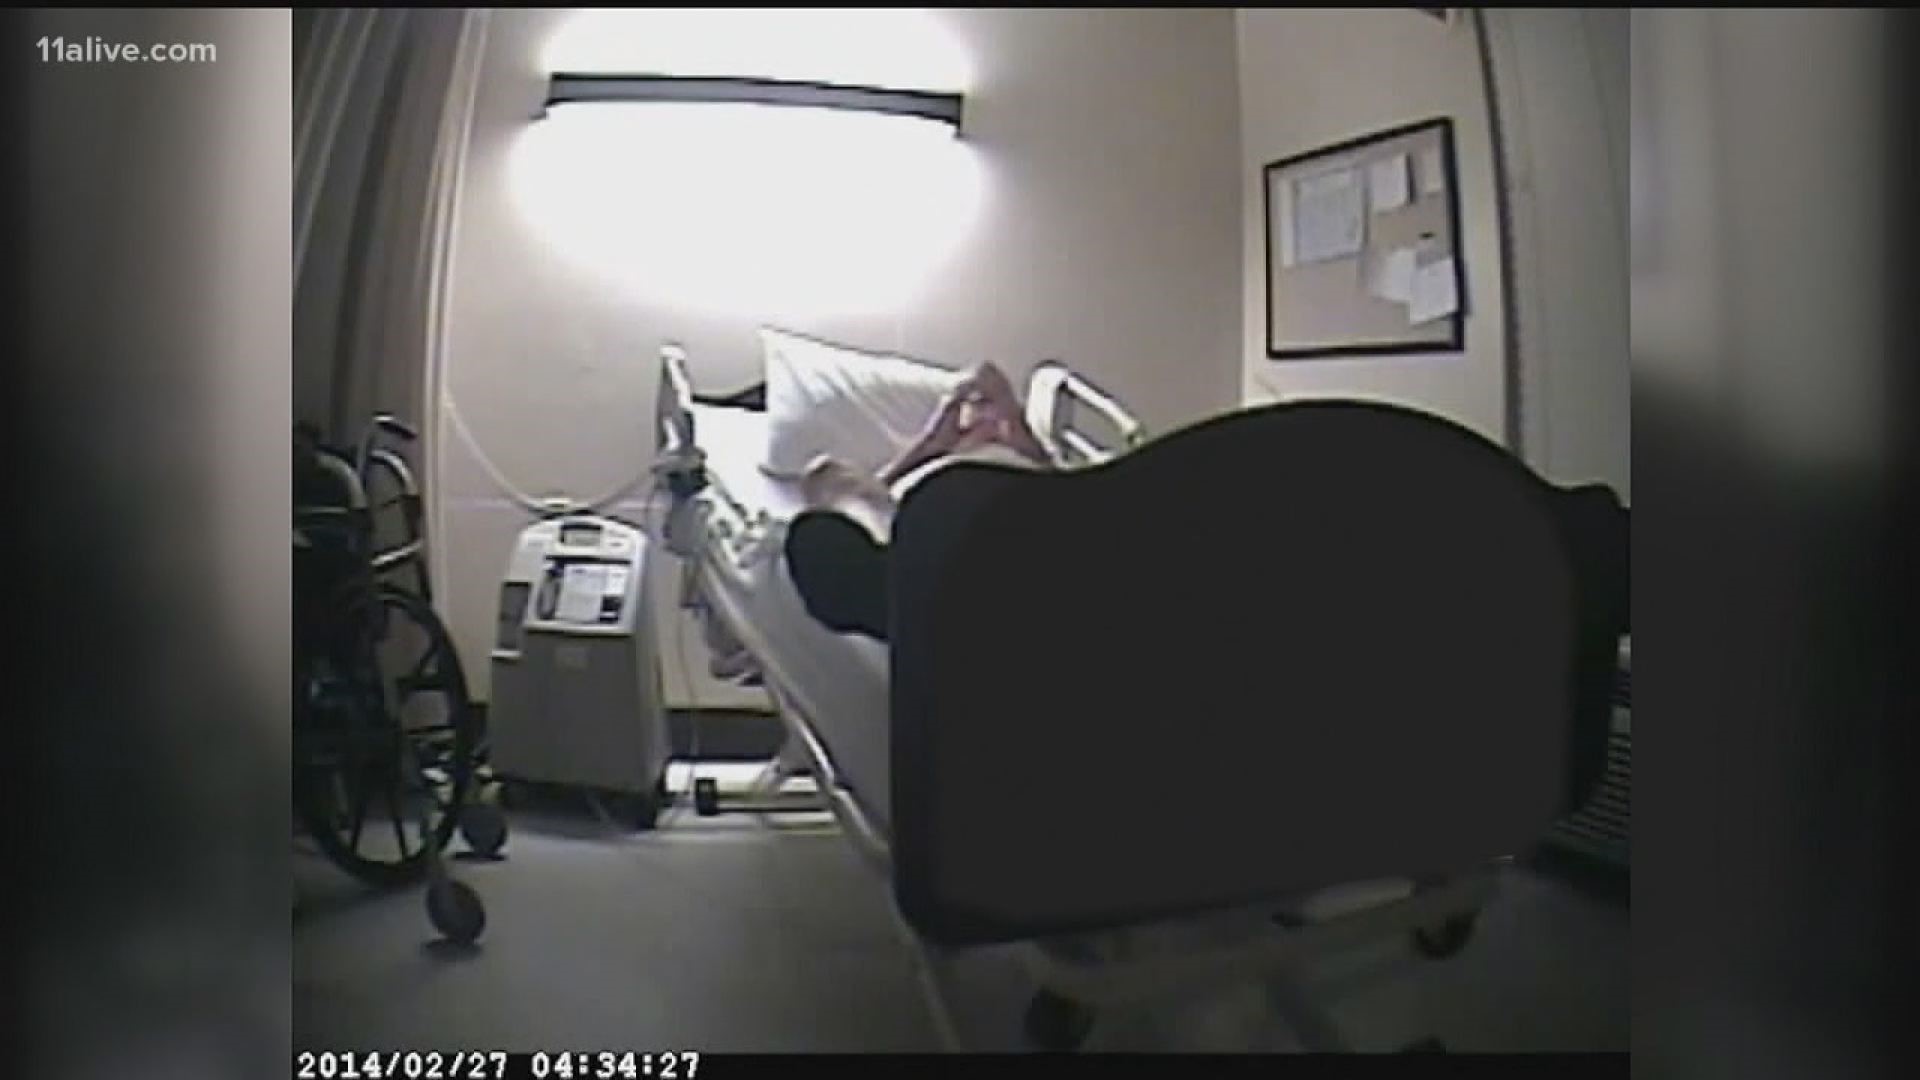 The sentence comes nearly five years after an 11Alive Reveal investigation uncovered hidden camera video that compelled law enforcement to arrest three nurses.